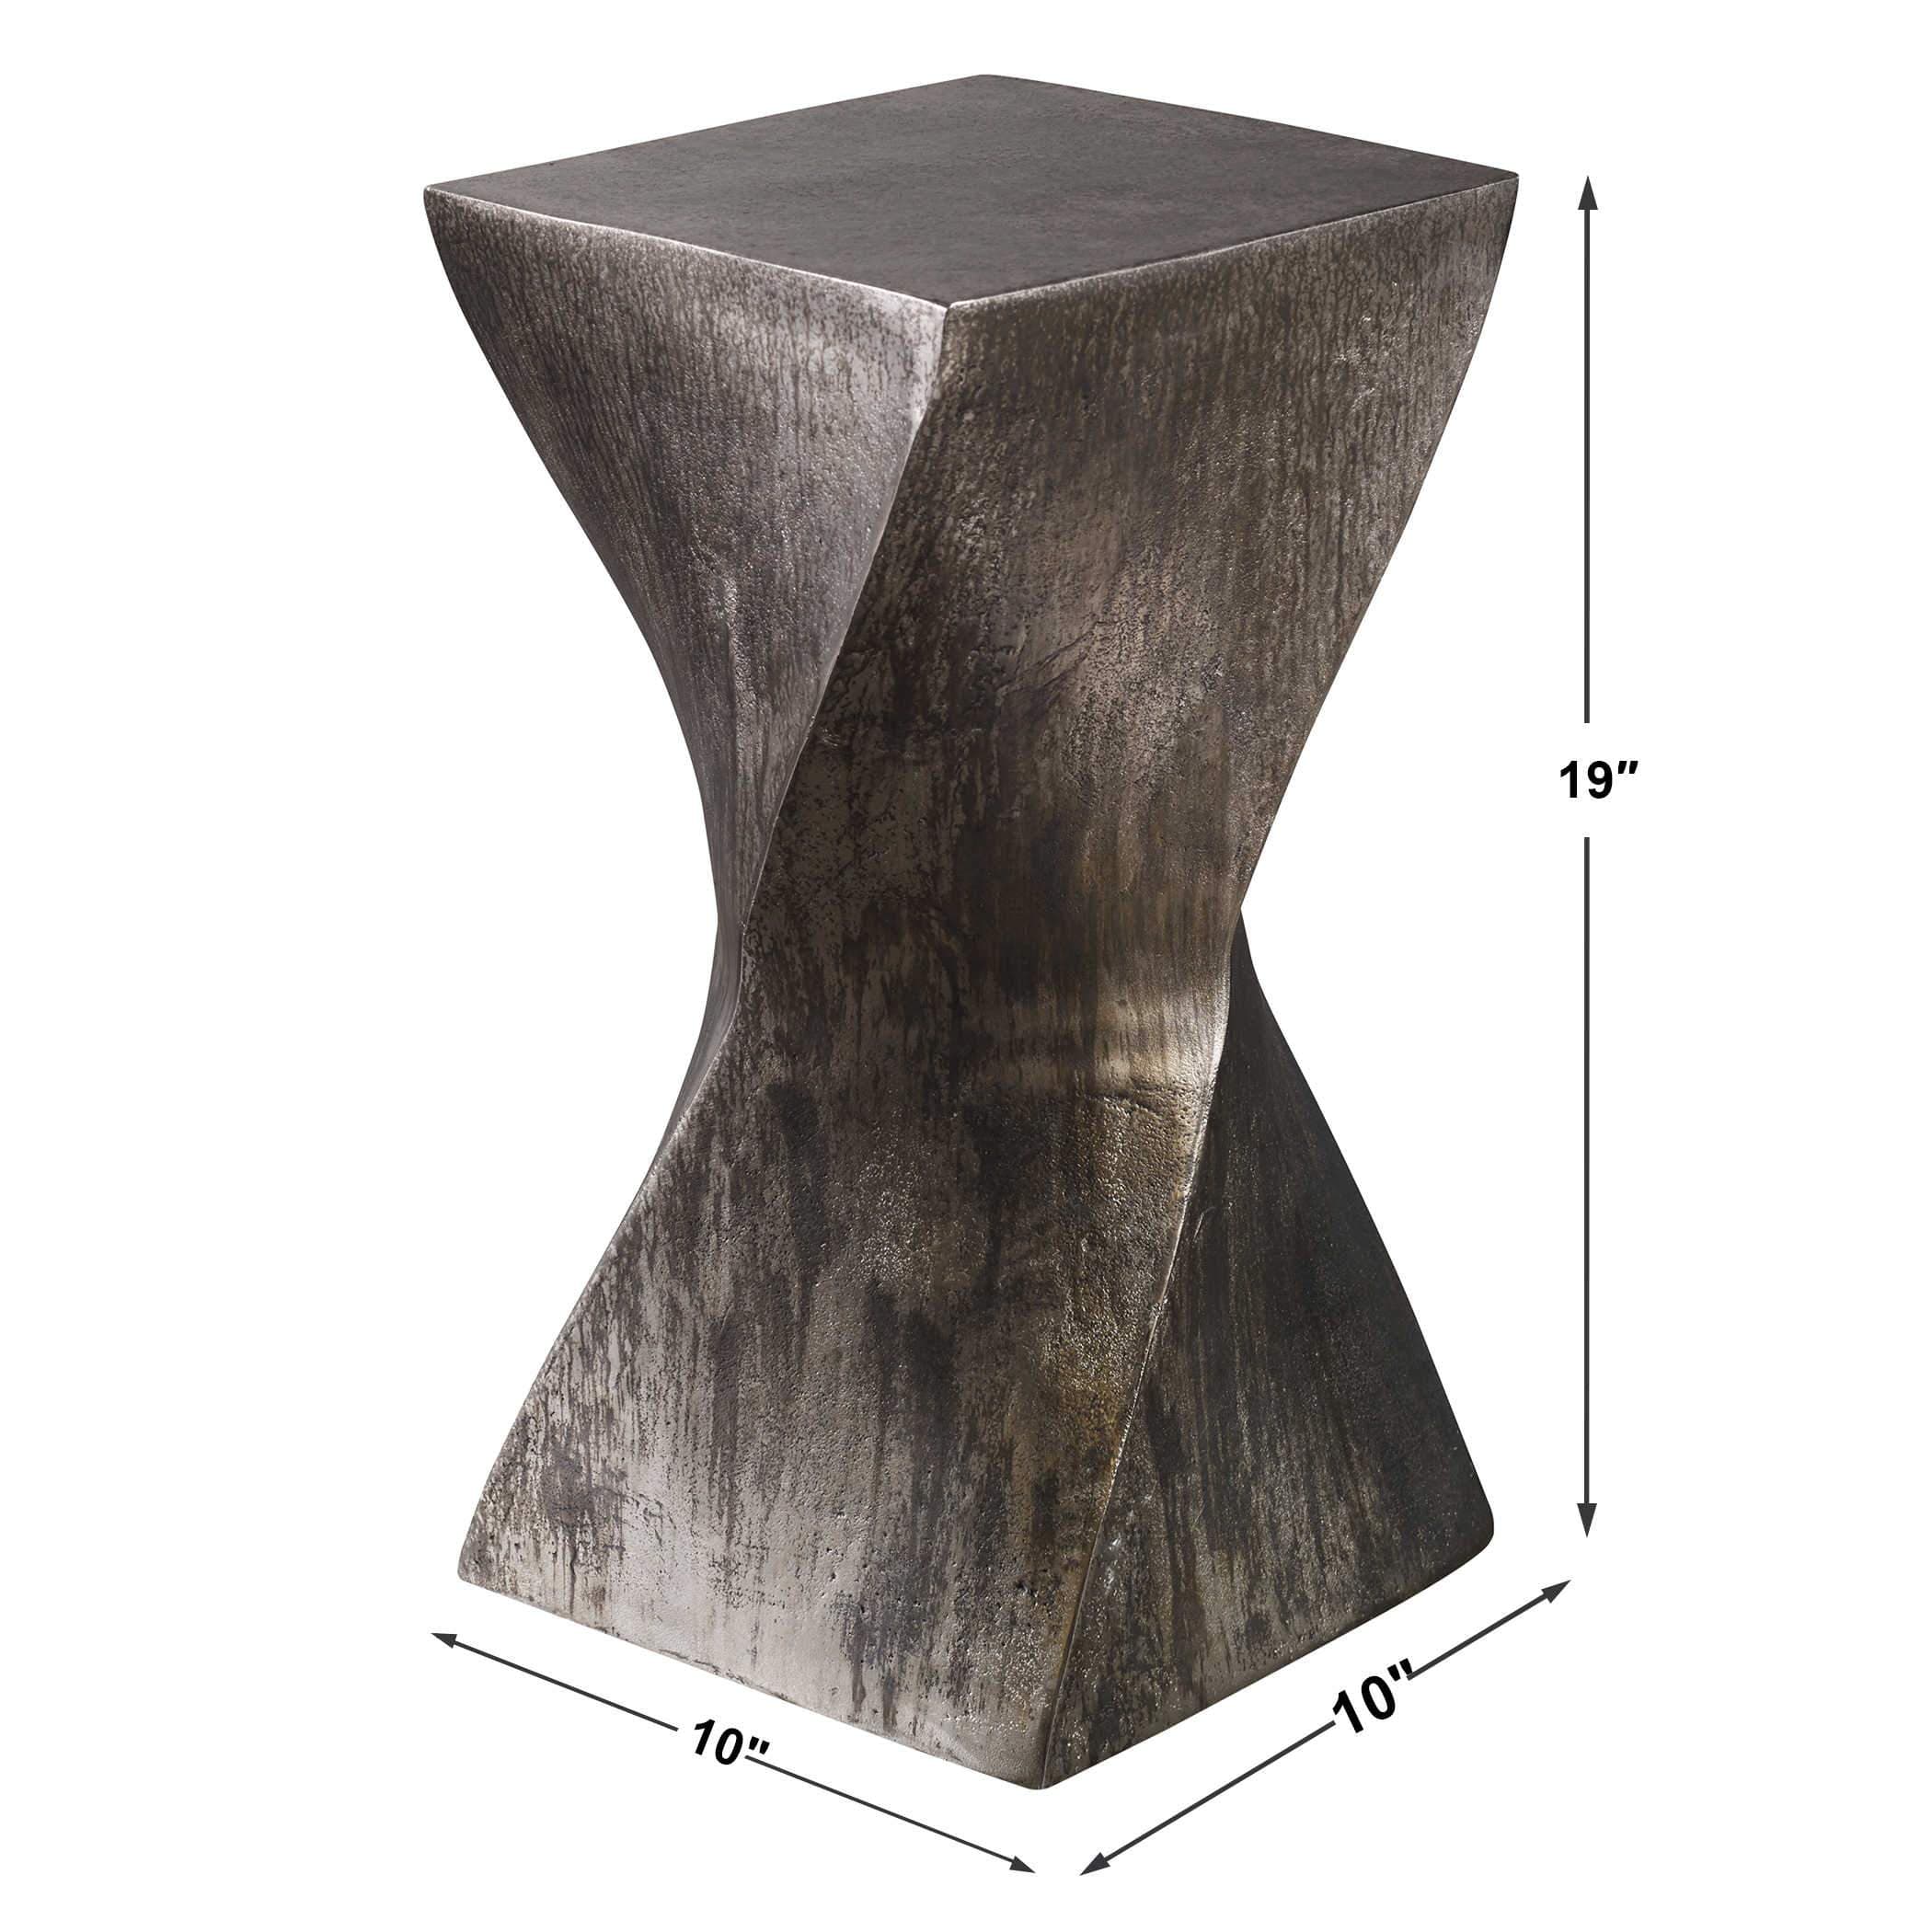 Aluminum Euphrates Twisted Accent Table Uttermost